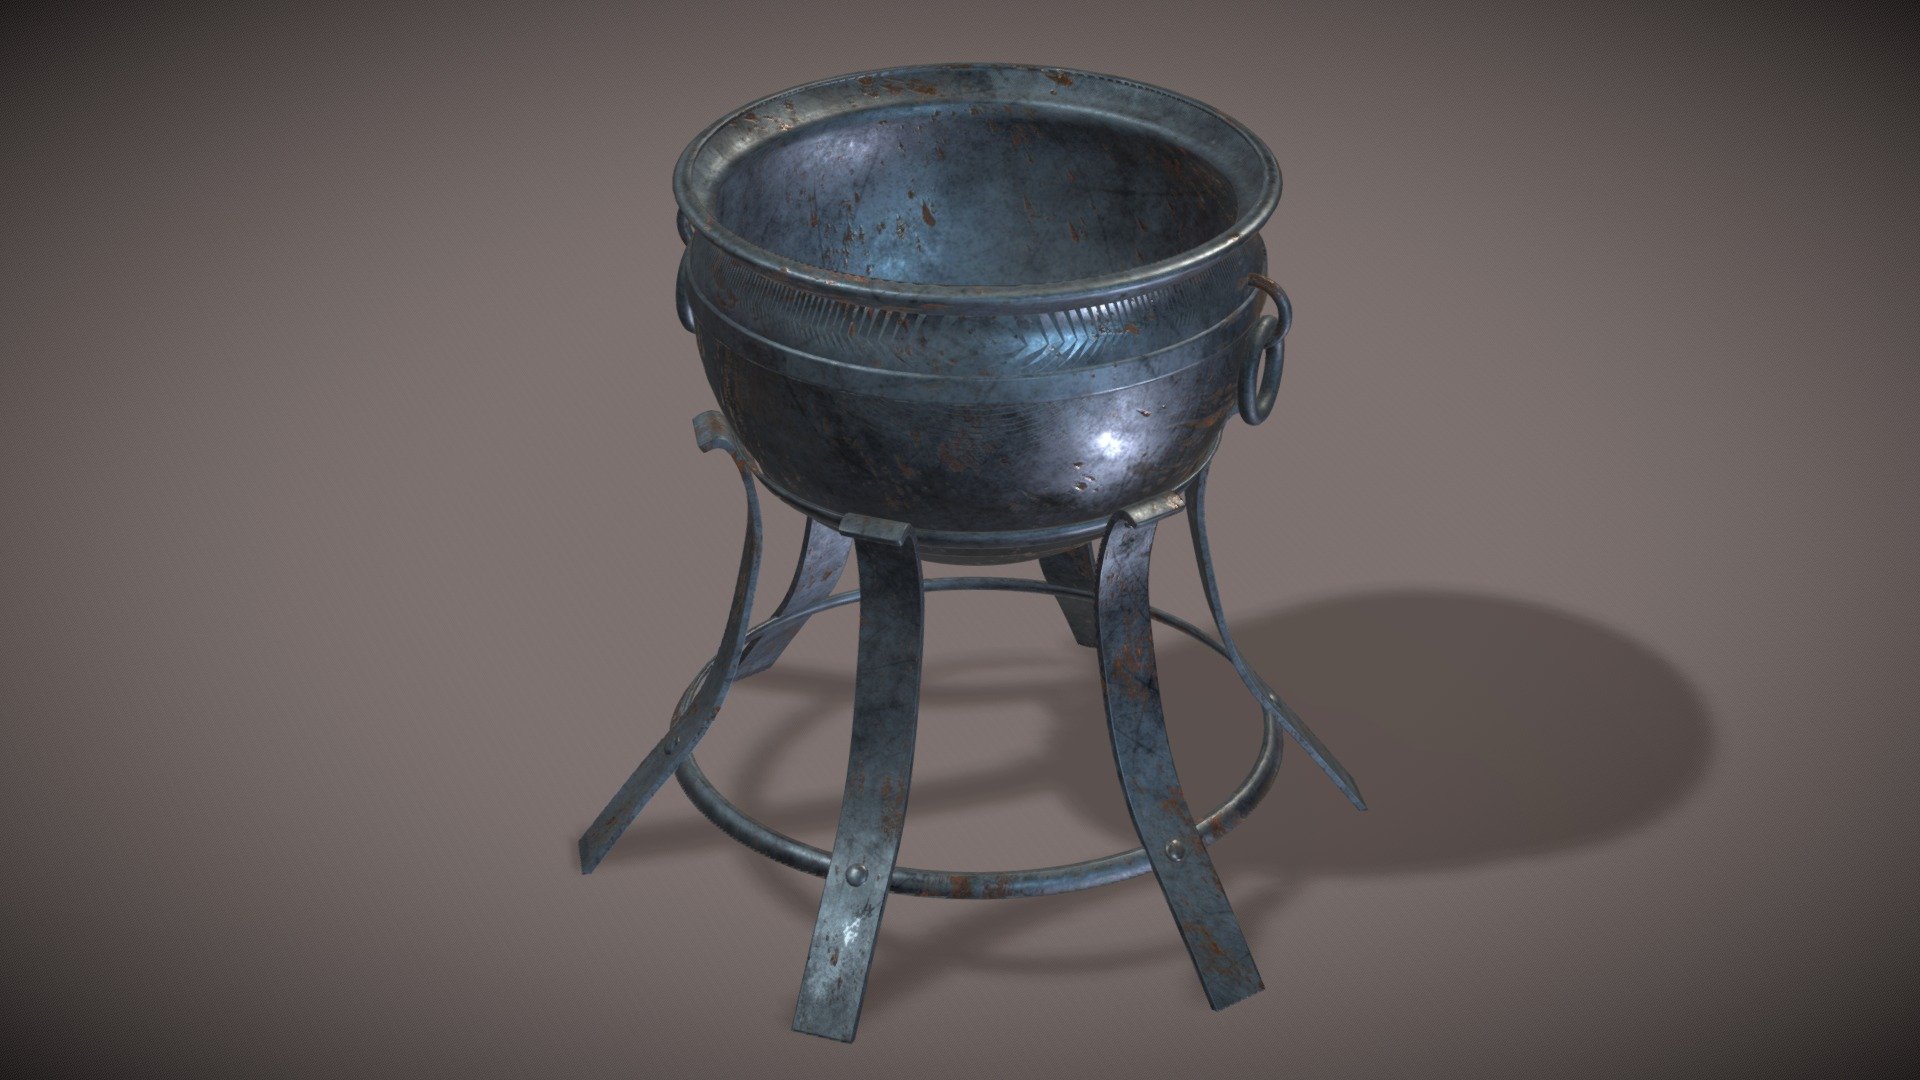 Worn Rusty Brazier with stand and round container with handles.

This model has PBR-textures:
1. Diffuse
2. Roughness
3. Normal
4. Metalness - Worn Brazier - Buy Royalty Free 3D model by MarkoJantti 3d model